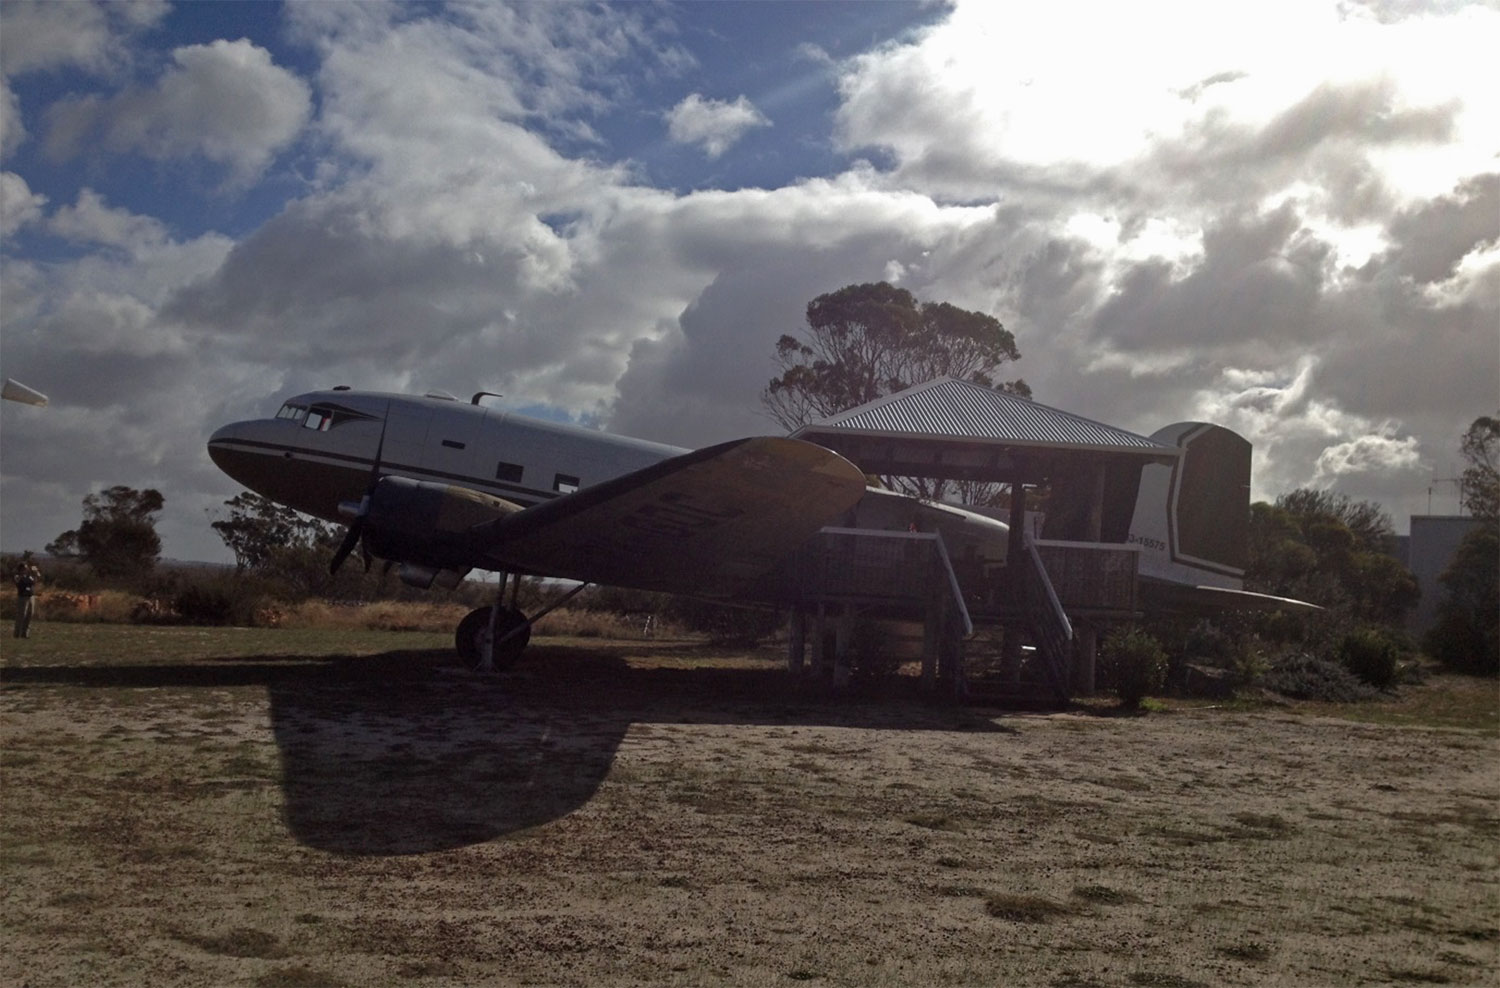 Our accommodation for the night—the converted DC3 at The Dutch Lily.